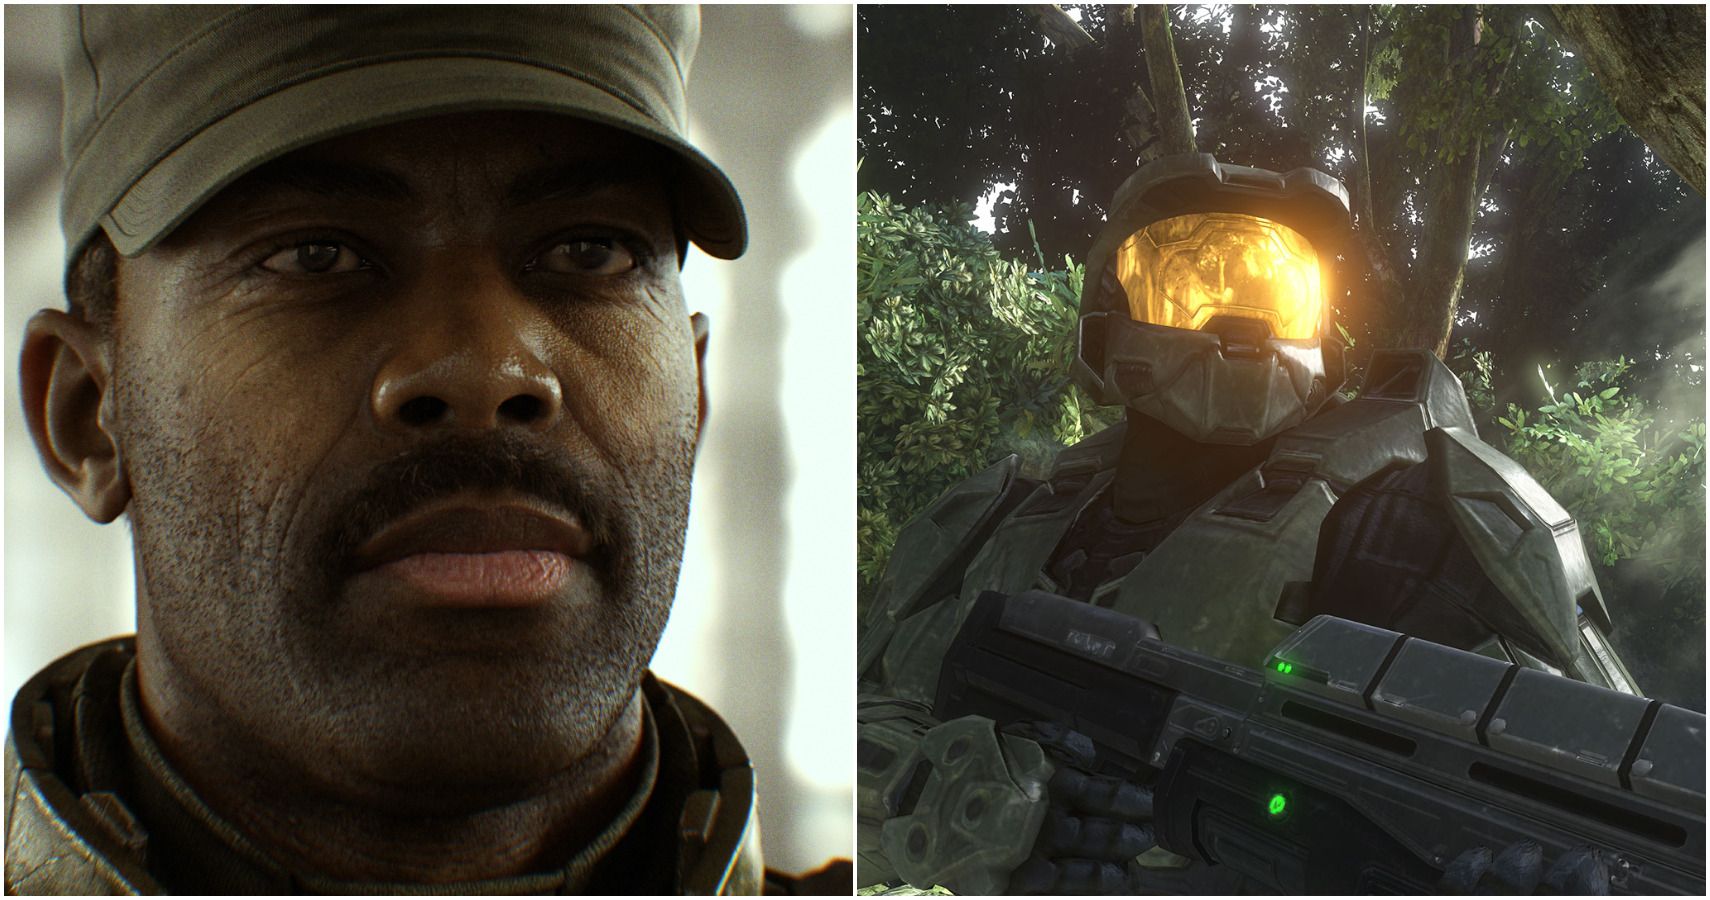 Sgt. Johnson on left, Master Chief on right. Only head shots.